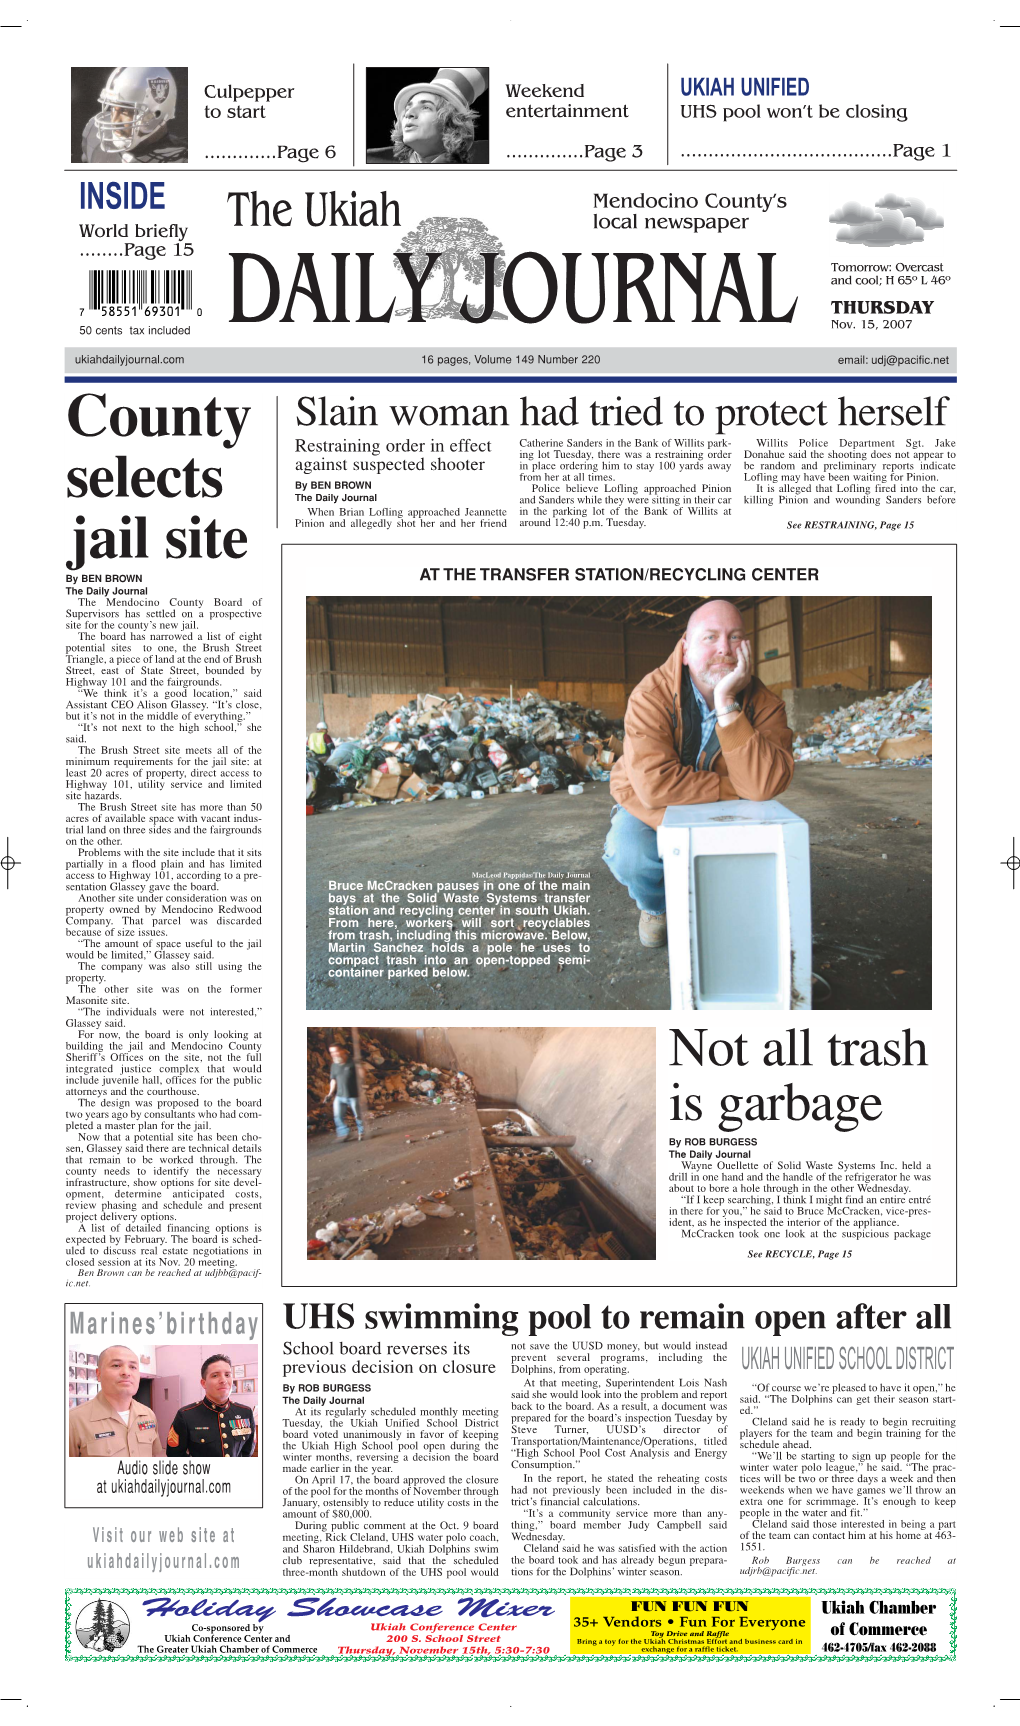 County Selects Jail Site